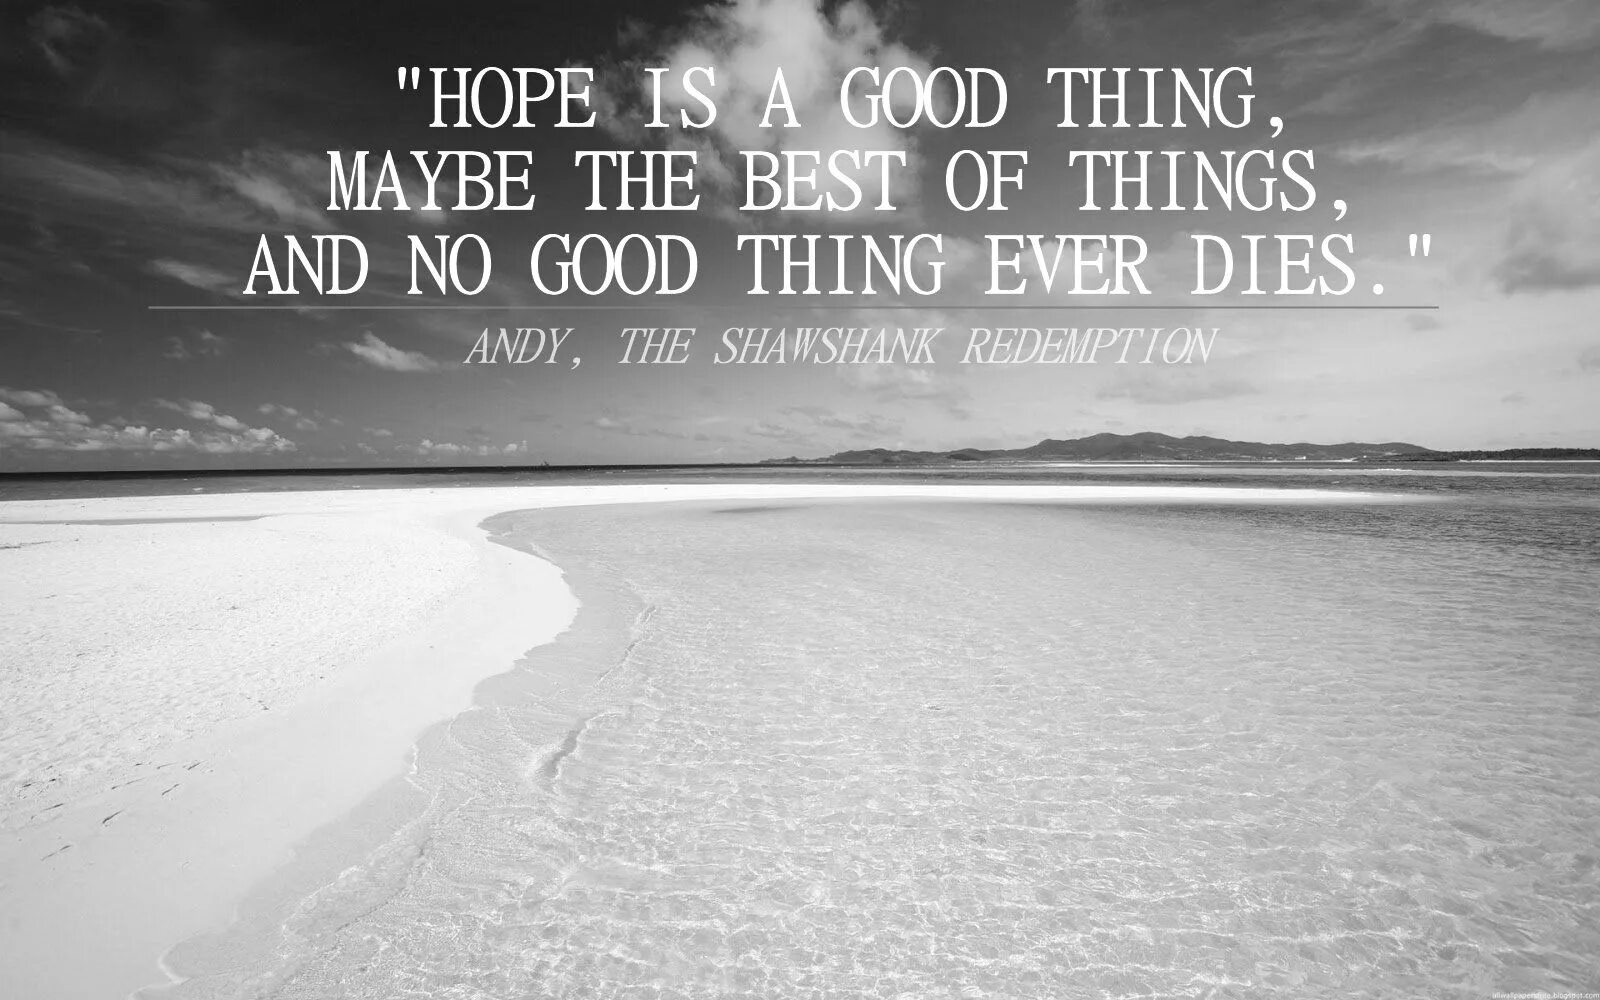 Hope is a good thing maybe the best of things and no good thing ever dies. Remember Red hope is a good thing. Shawshank Redemption. The Shawshank Redemption цитаты. That s a good thing